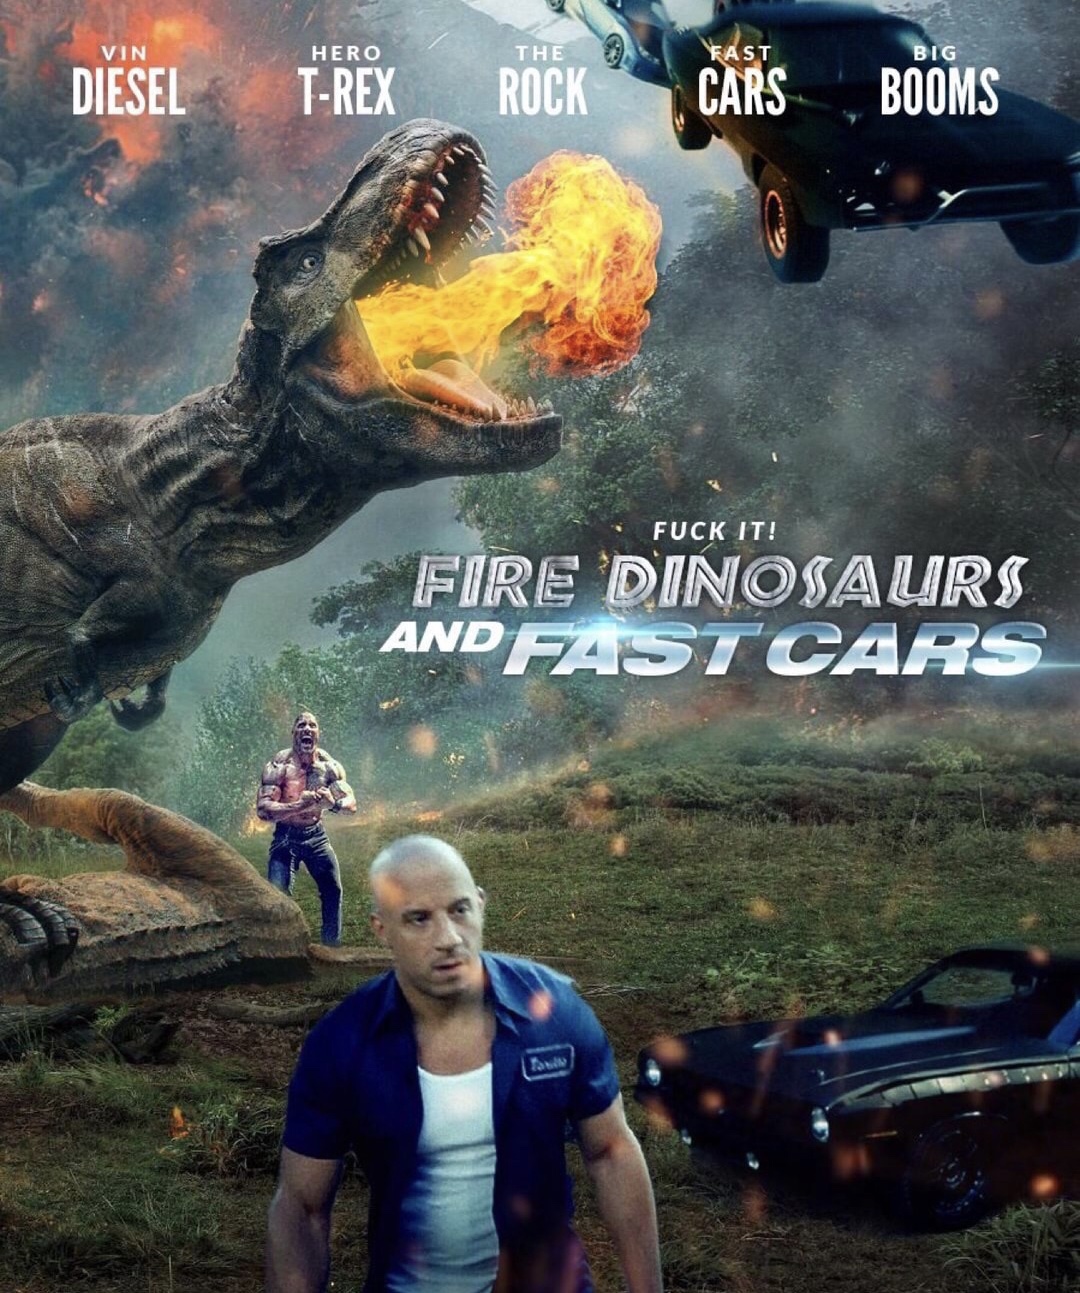 fire dinosaurs and fast cars - Hero The A Diesel TRex Rock Scarsbooms Fuck It! Fire Dinosaurs And Fast Cars